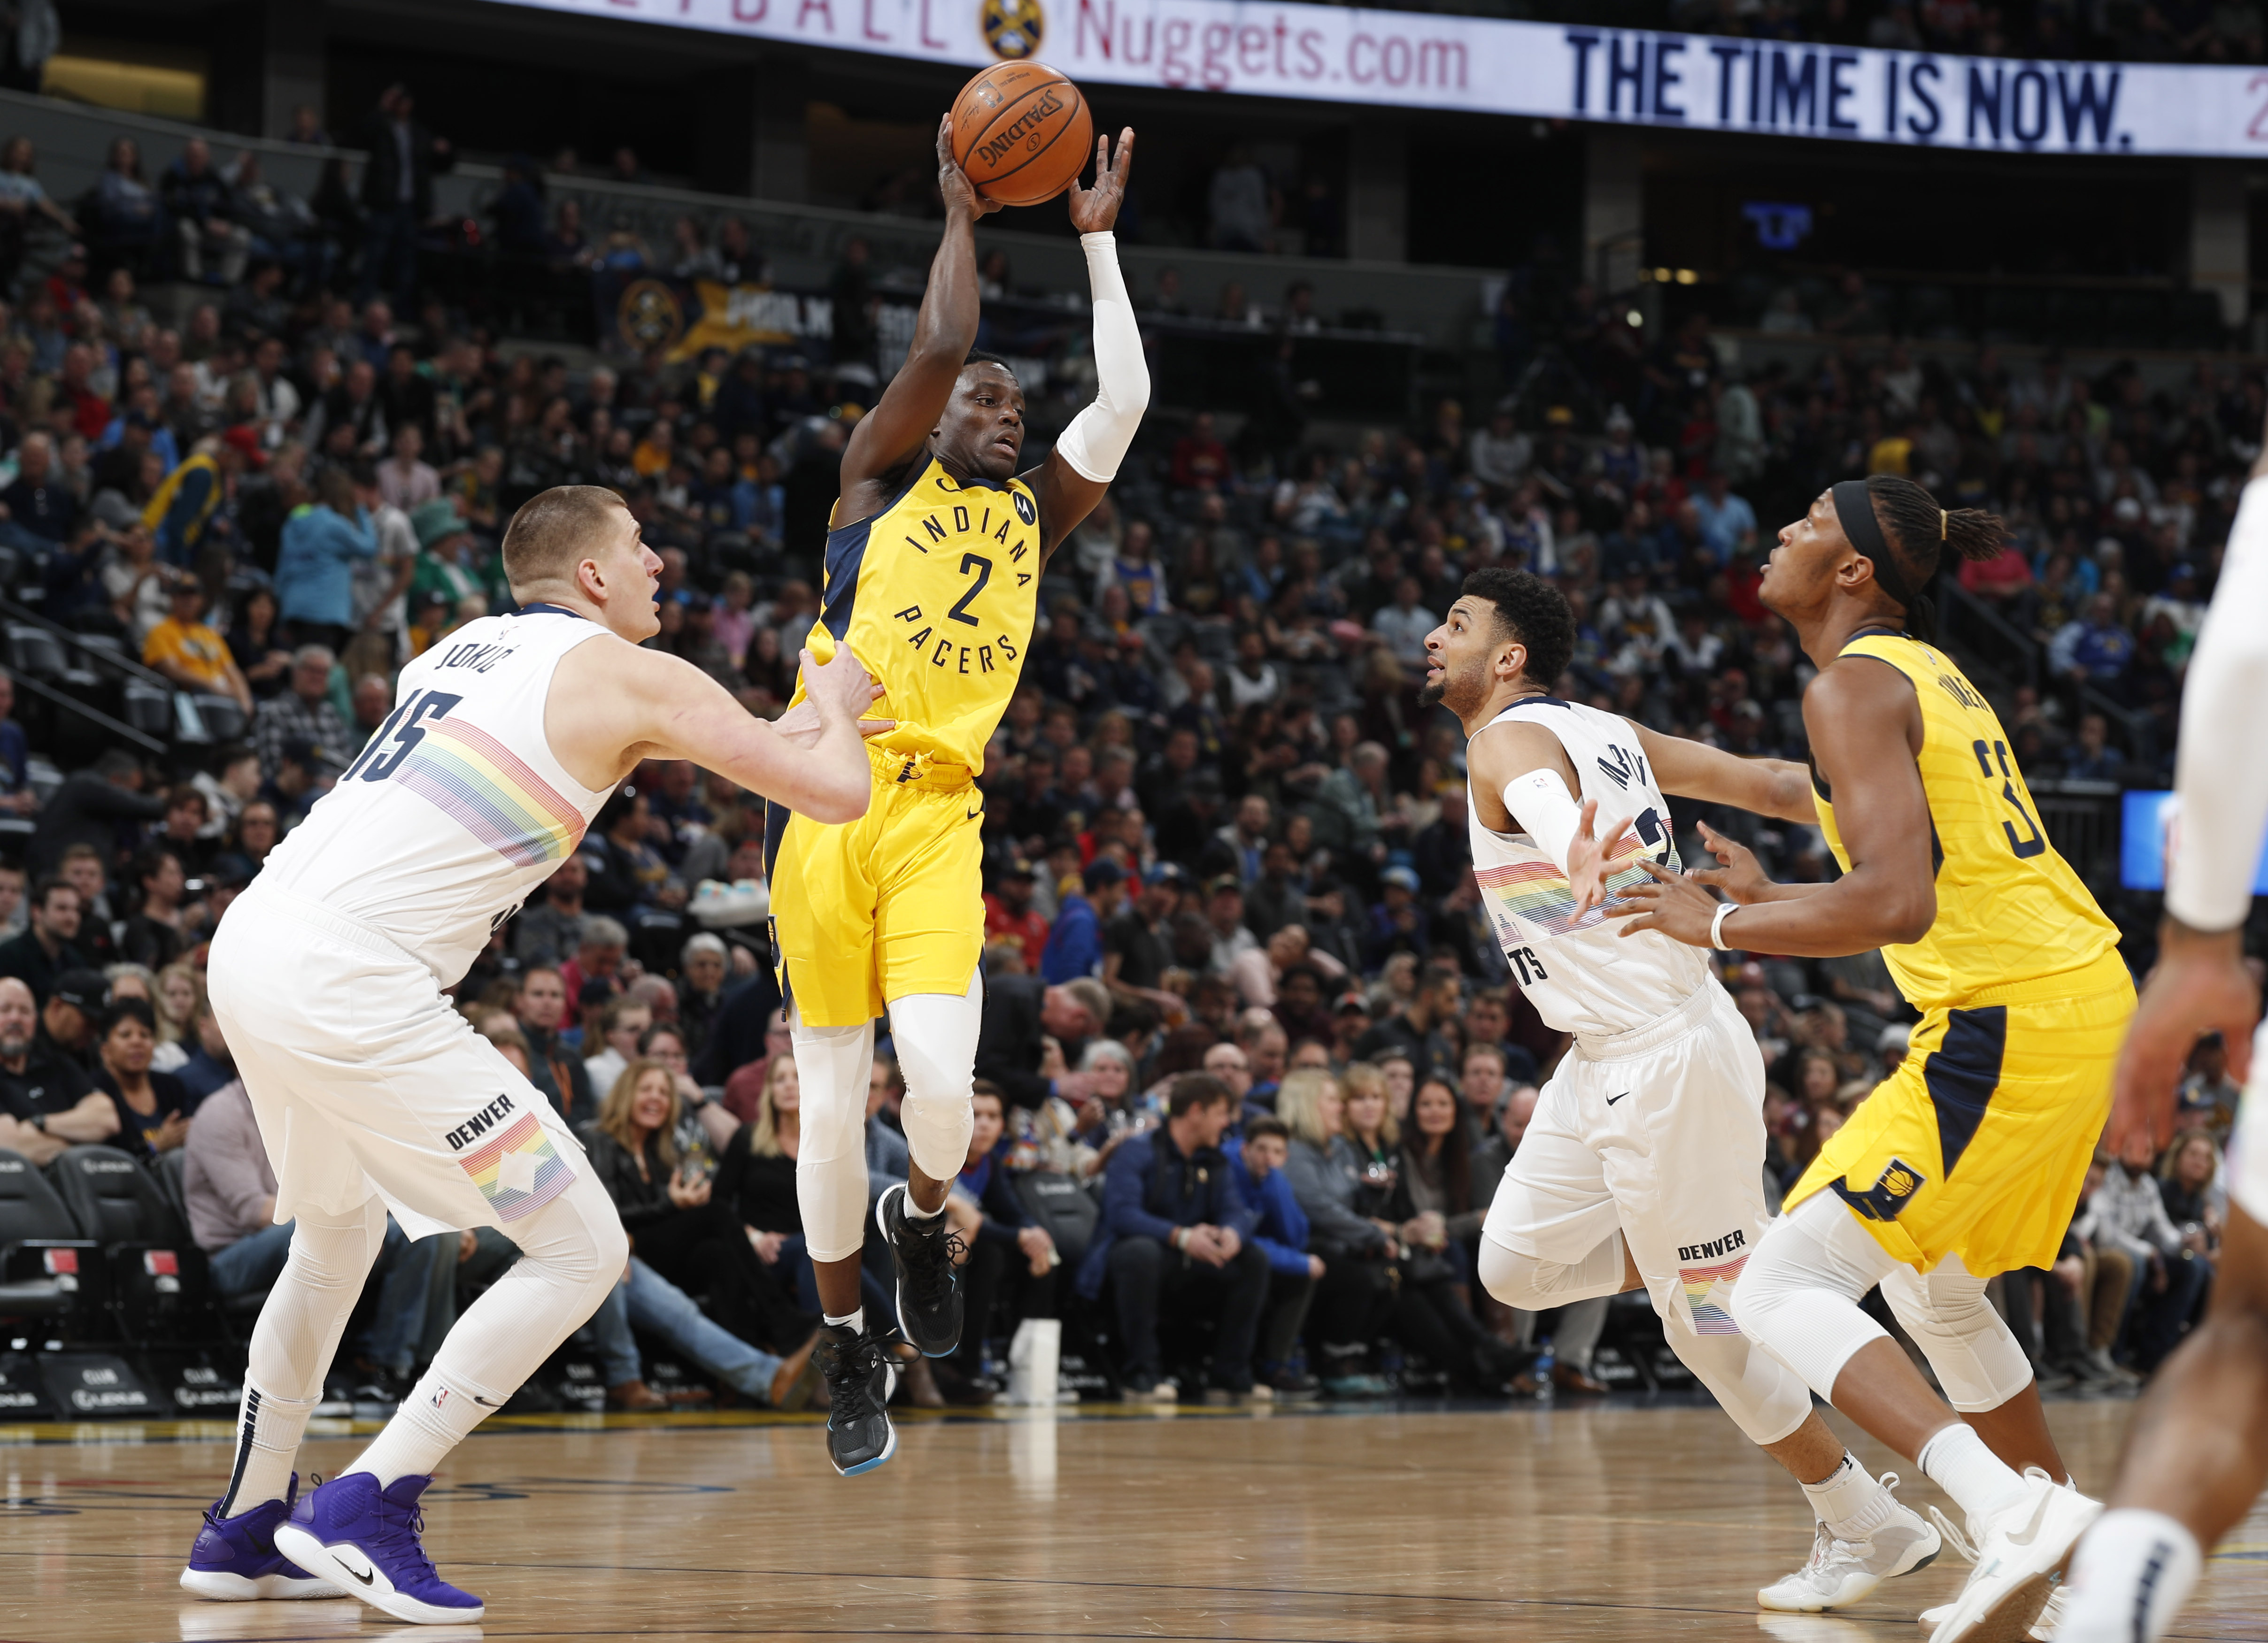 Millsap’s floater leads Nuggets to 102-100 win over Pacers